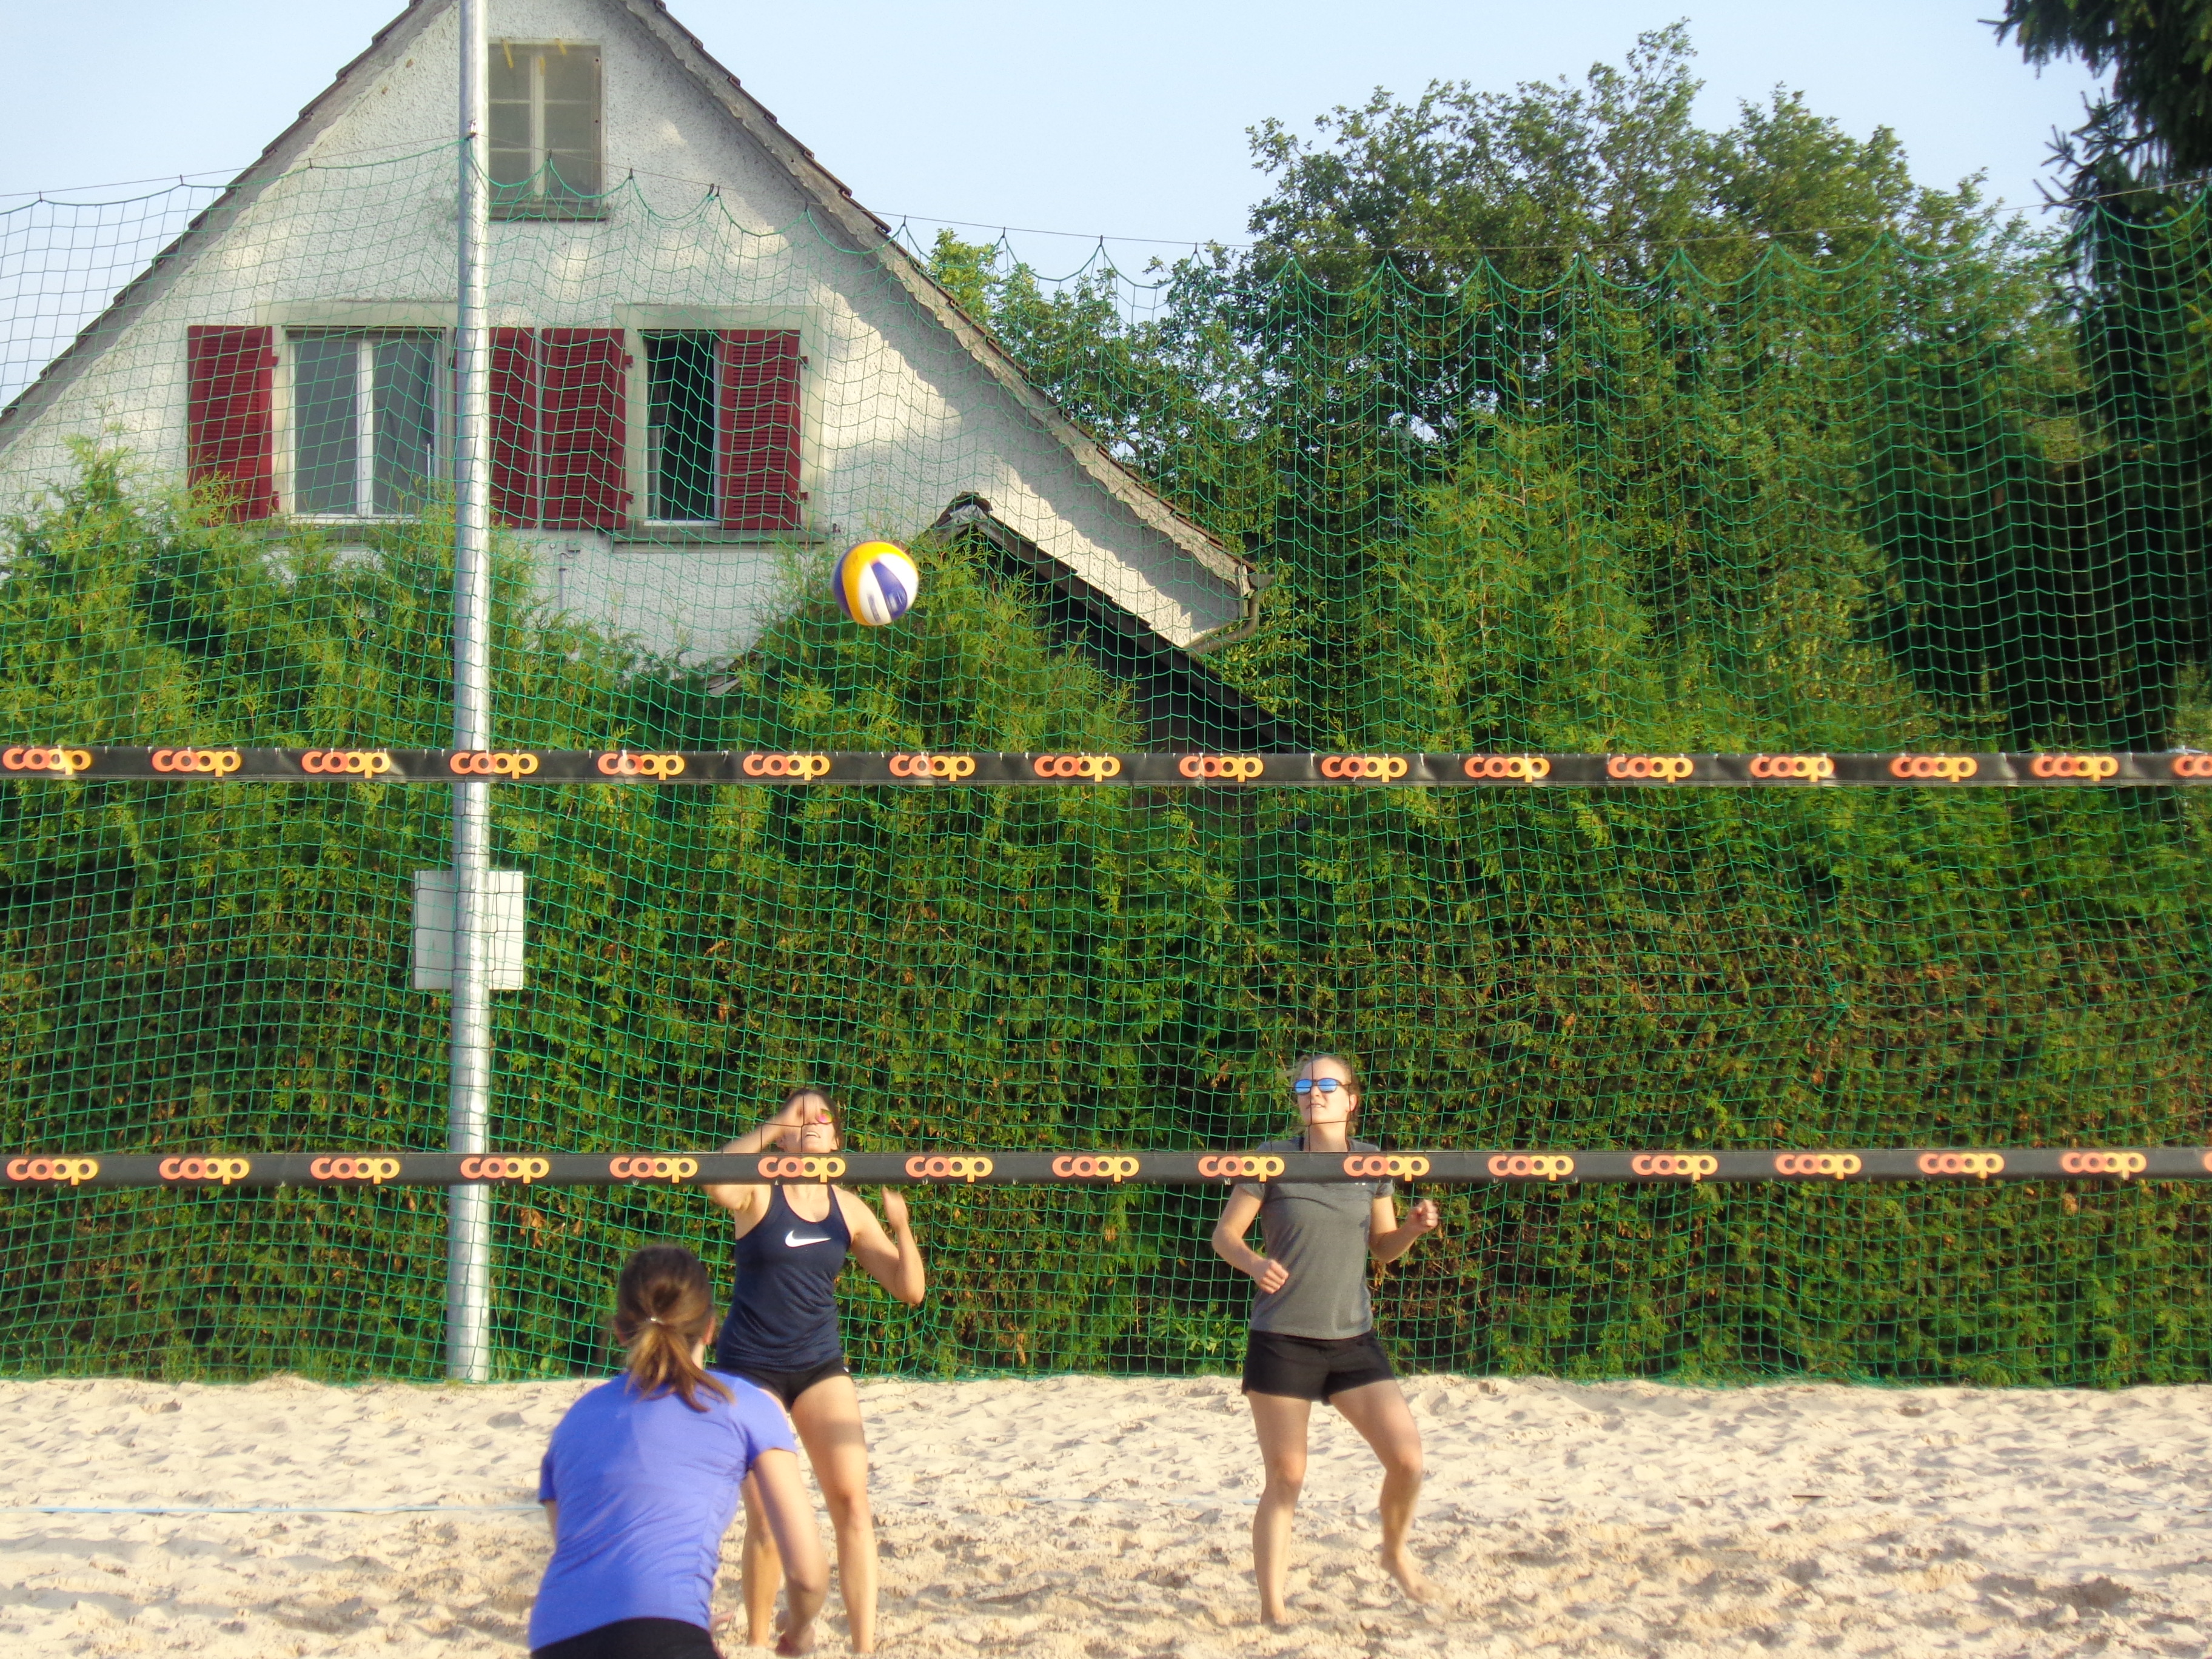 Beach-Volleyball Action